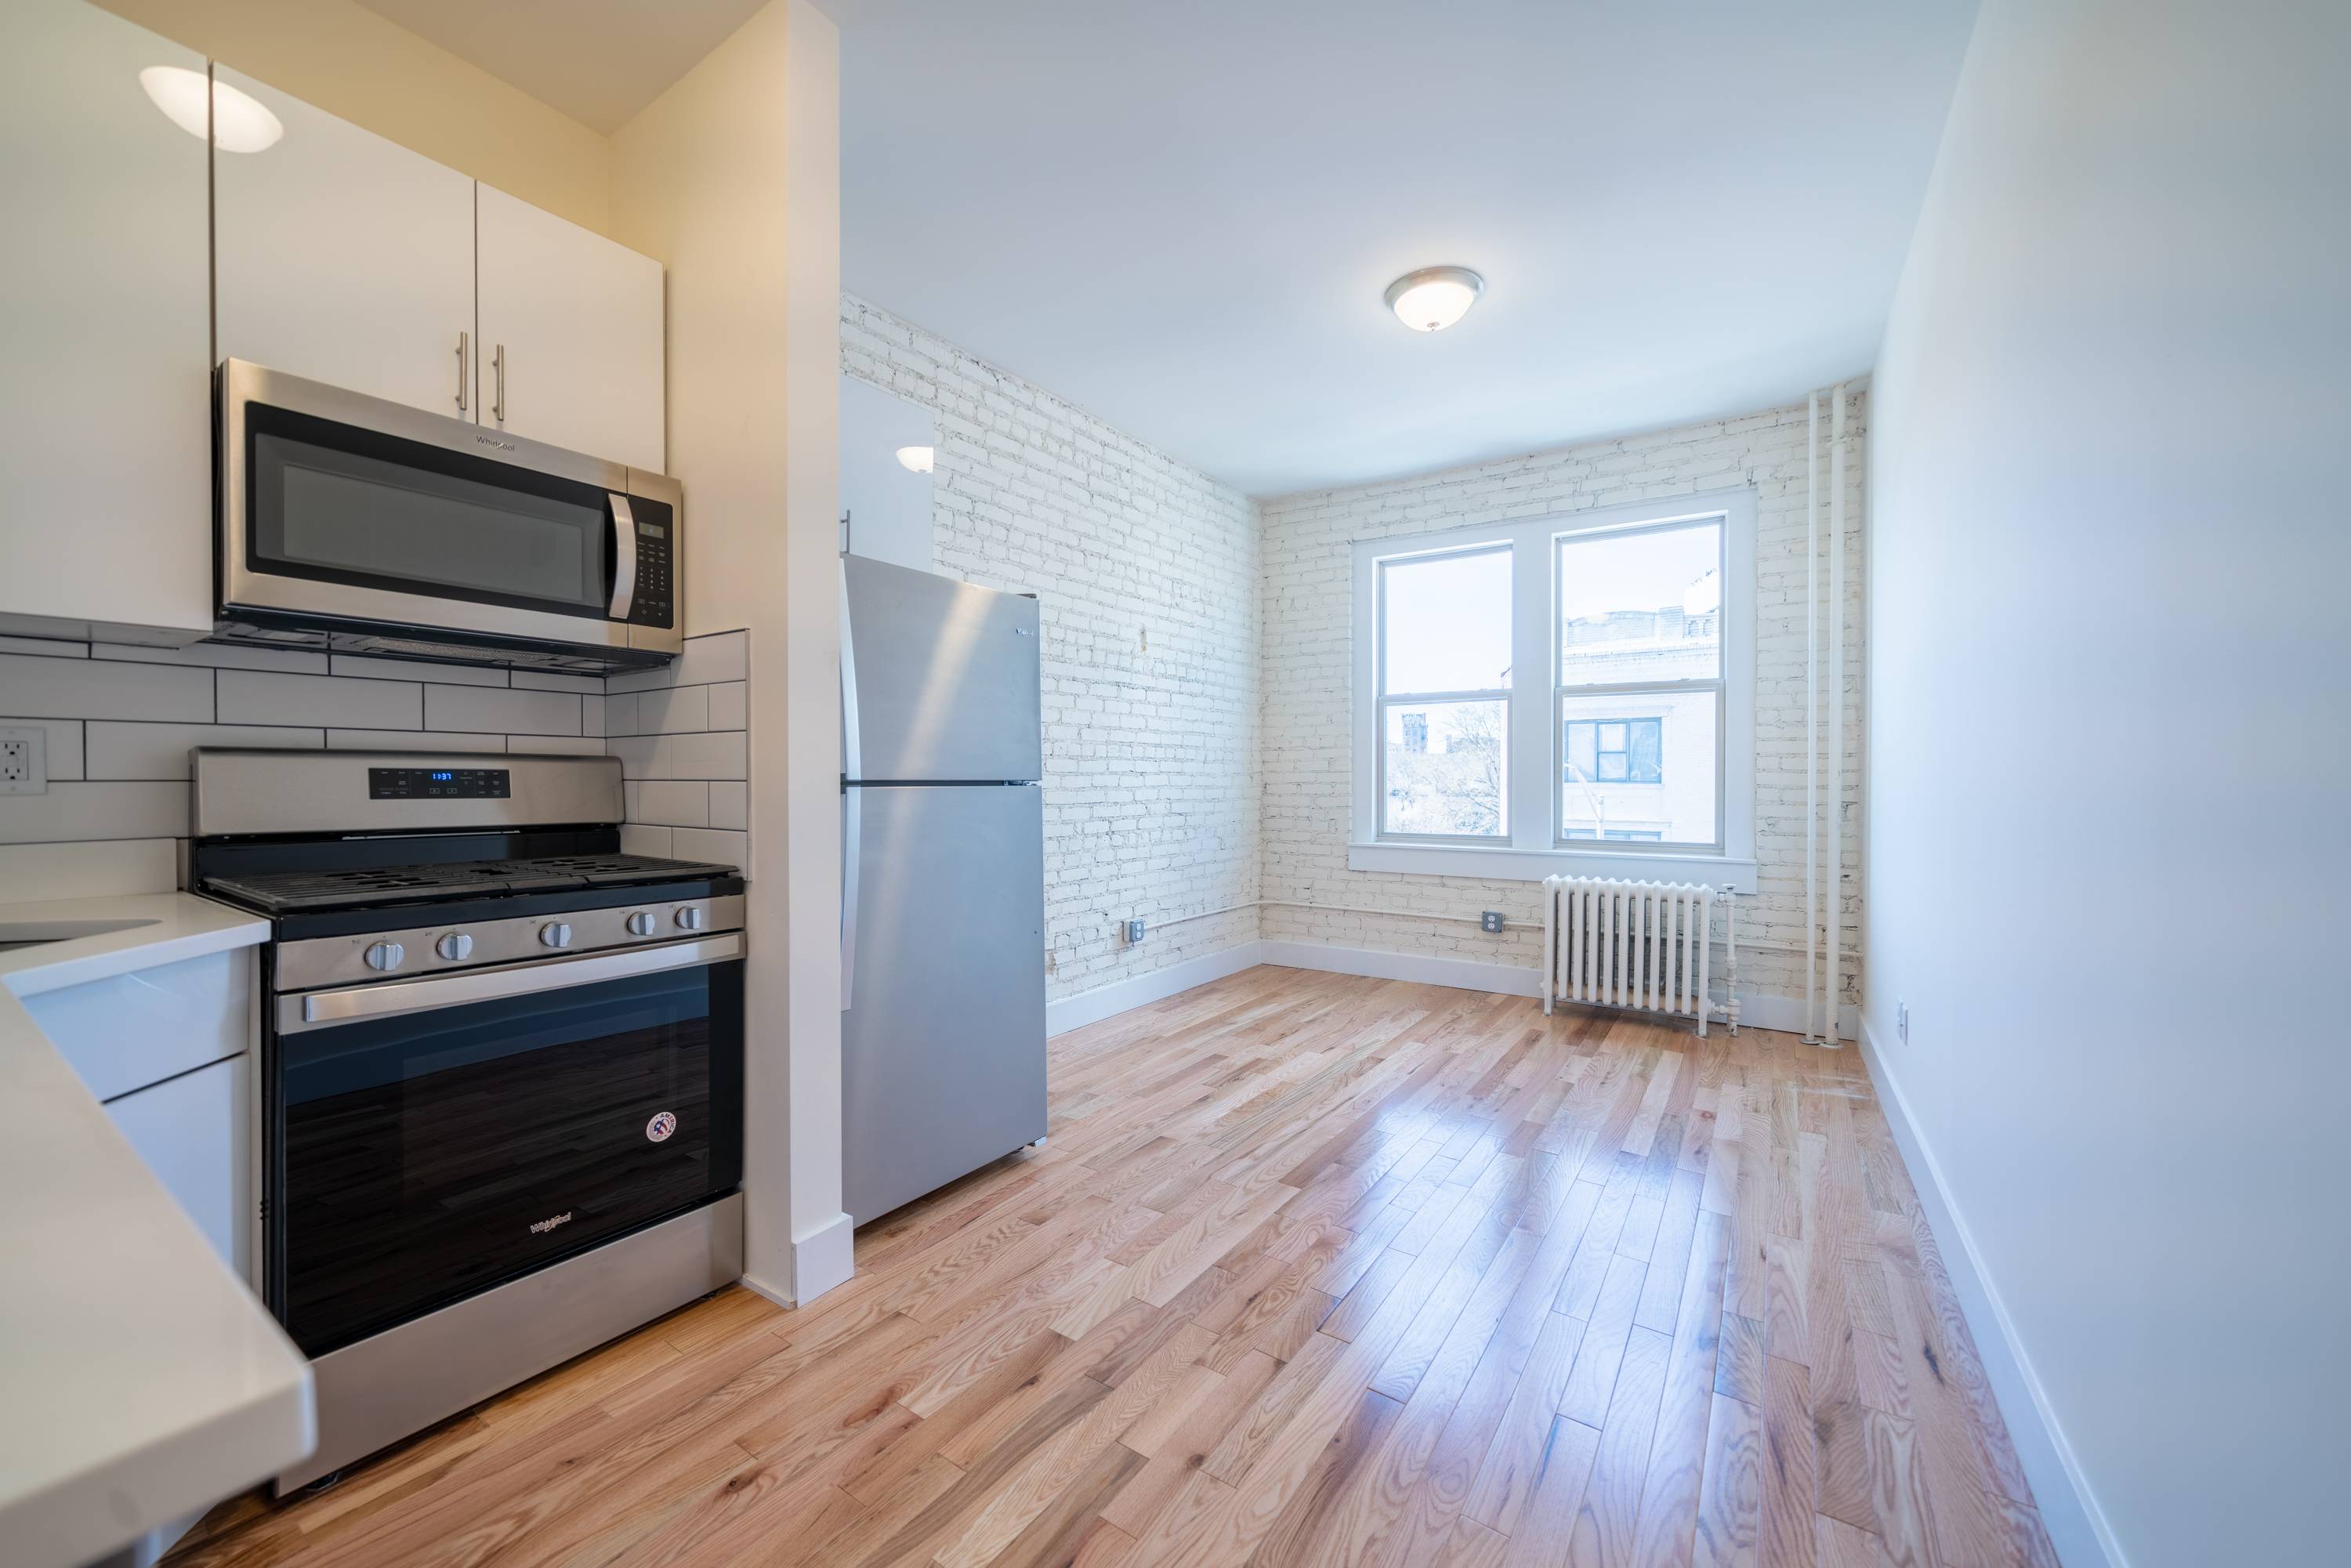 1  BR- Stunning Renovated One Bedroom in Prime Journal Square Location!  Laundry on Site, Seconds to the Journal Square Path Transportation Center!